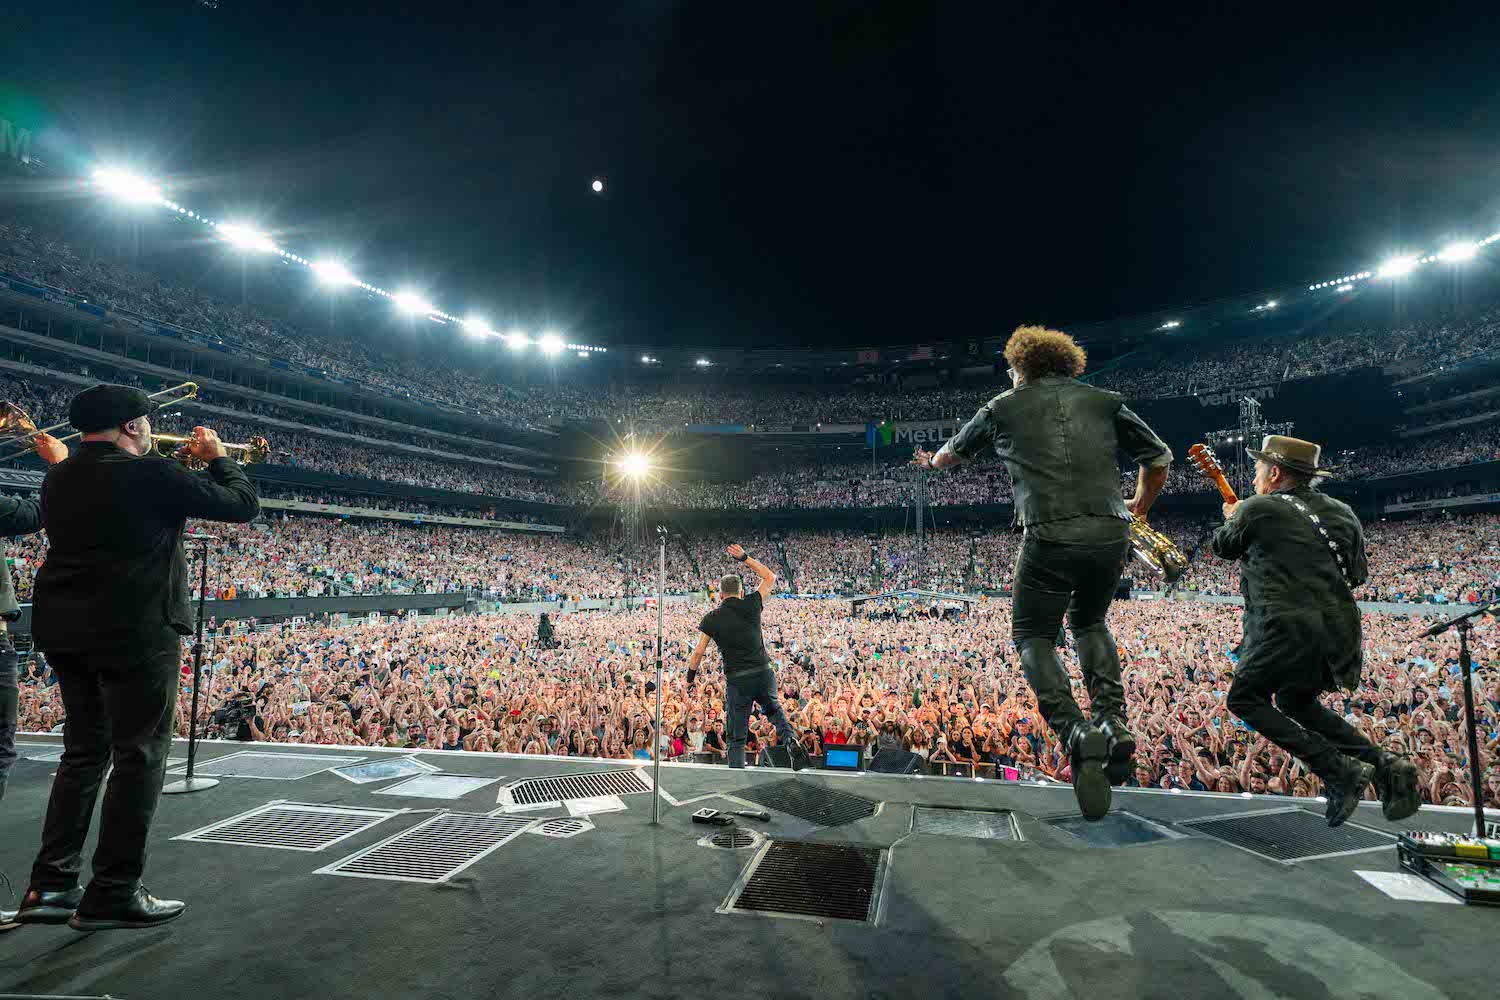 Bruce Springsteen & E Street Band at MetLife Stadium, East Rutherford, NJ on August 30, 2023.